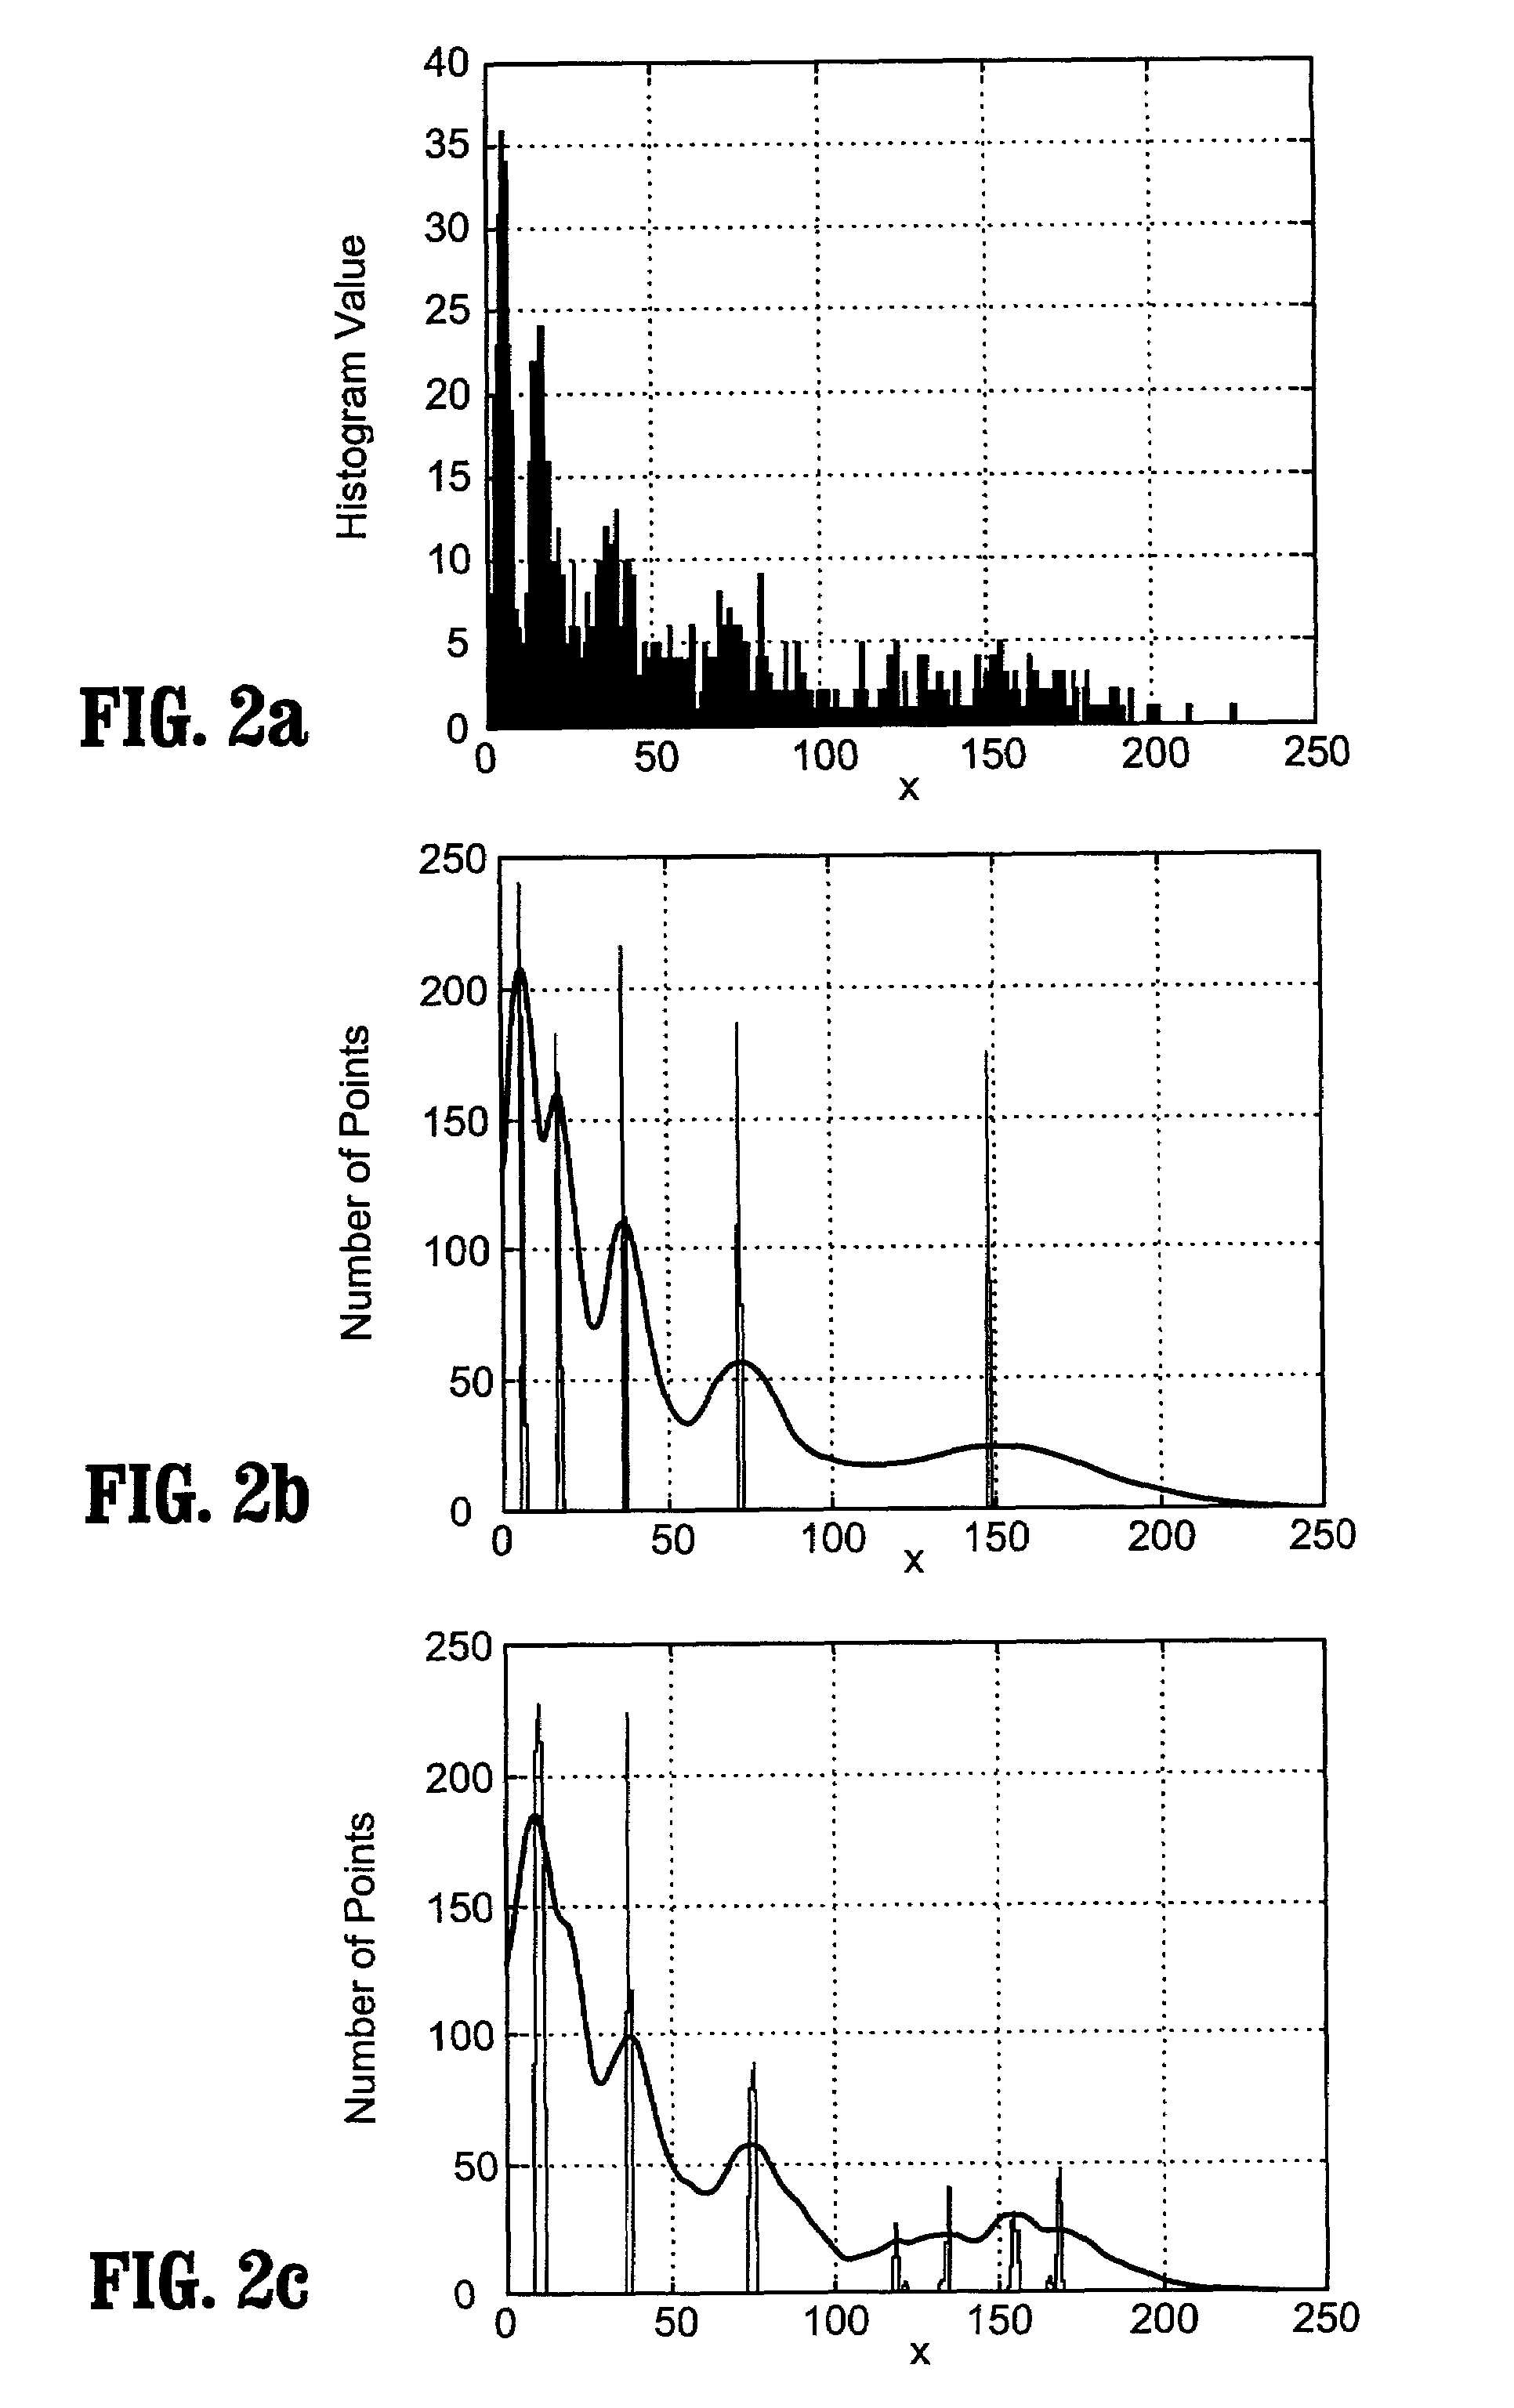 Systems and methods for automatic scale selection in real-time imaging